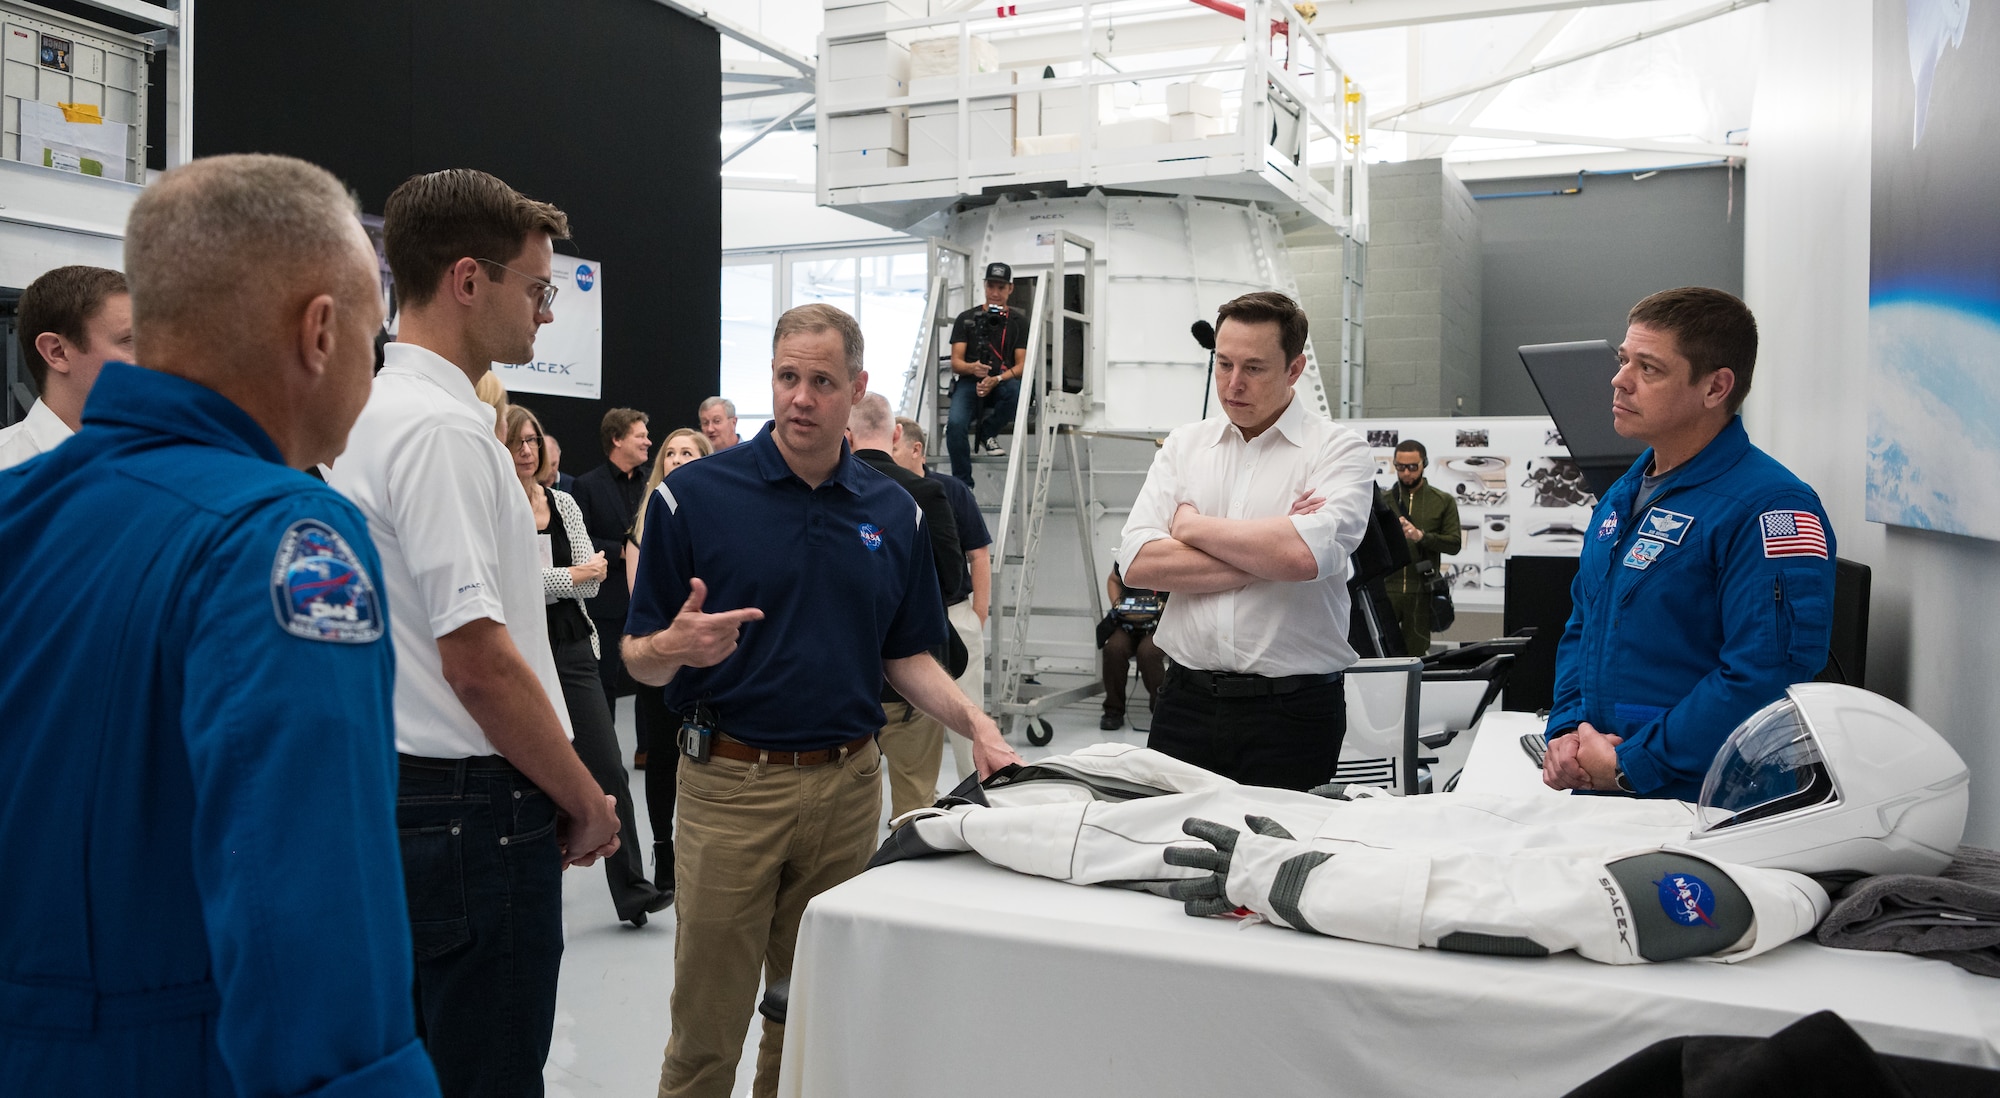 SpaceX Chief Engineer Elon Musk, second from right, and NASA astronaut Bob Behnken, right, look on as NASA Administrator Jim Bridenstine, third from left, speaks to NASA astronaut Doug Hurley, left, as they look at an identical version of the SpaceX spacesuit that he will wear for the Demo-2 mission during a visit to SpaceX Headquarters, Thursday, Oct. 10, 2019 in Hawthorne, CA. Behnken and Hurley are assigned to fly onboard Crew Dragon for the Demo-2 mission. Photo credit: (NASA/Aubrey Gemignani)